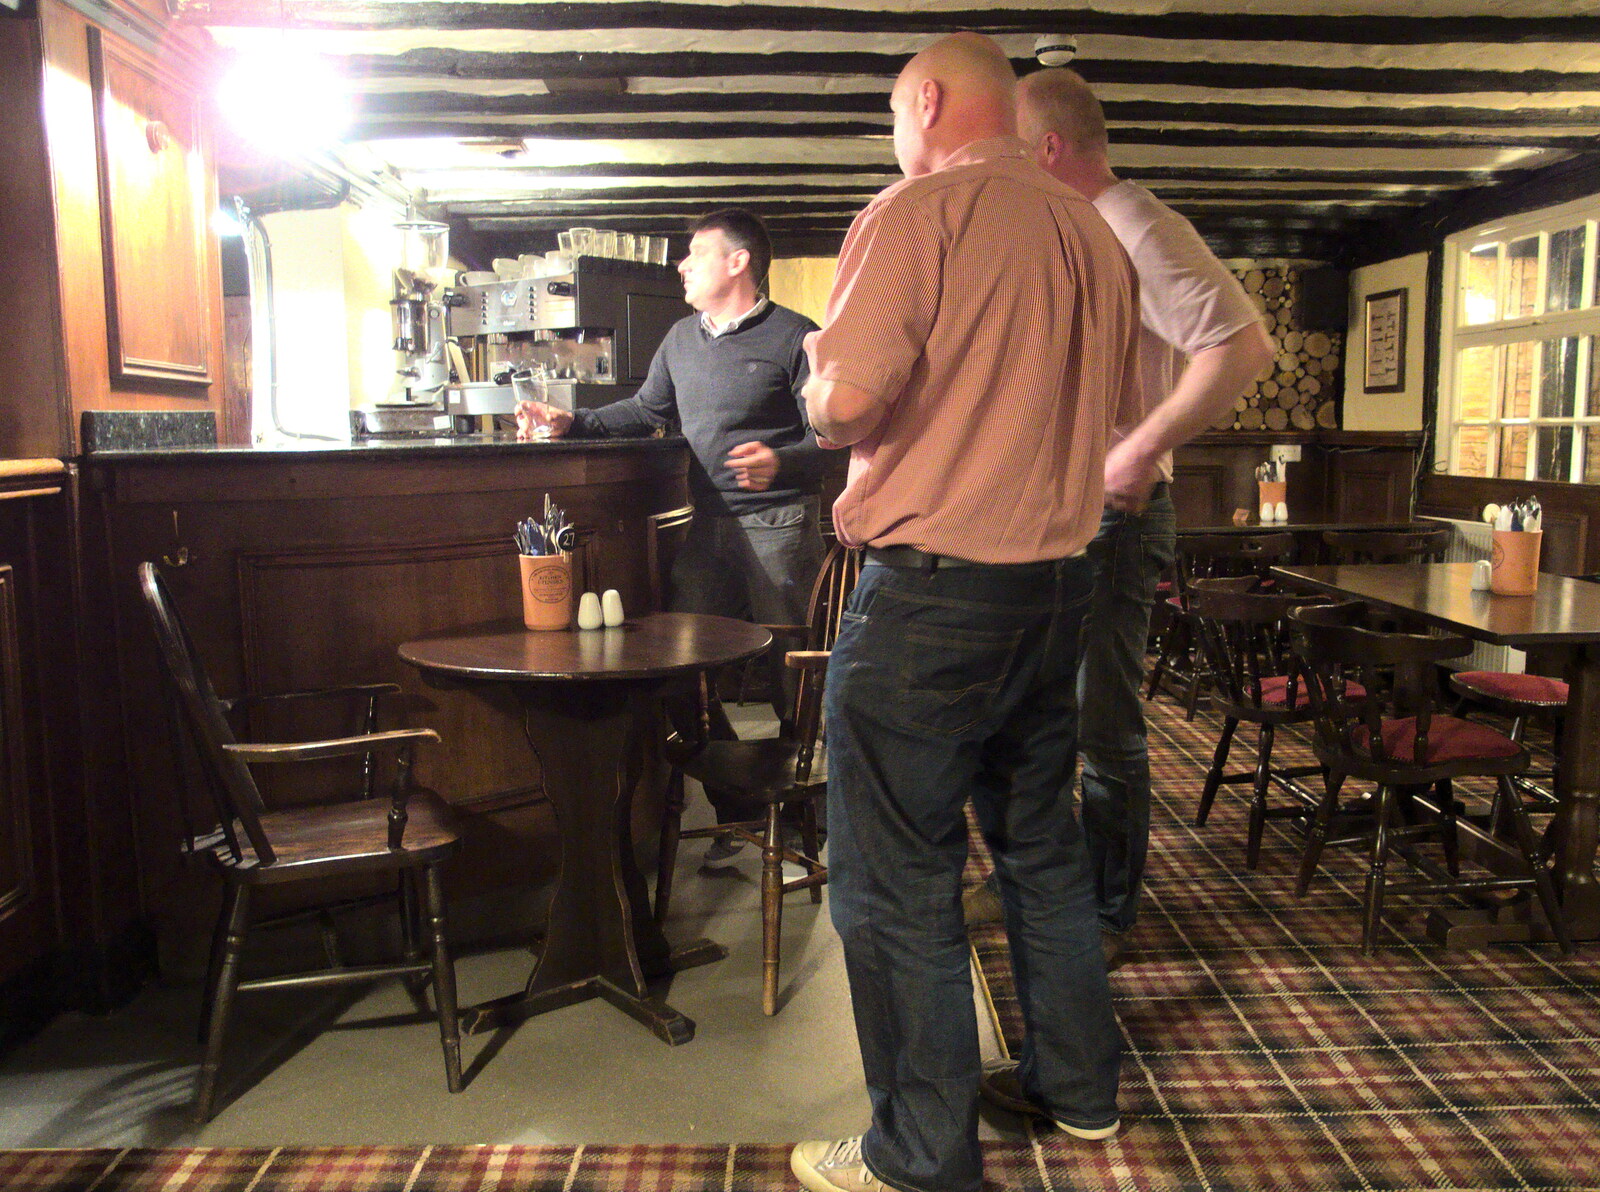 Ricey's at the Trowel and Hammer bar from The Last Day of Pre-School and Beer at the Trowel and Hammer, Cotton, Suffolk - 29th March 2015